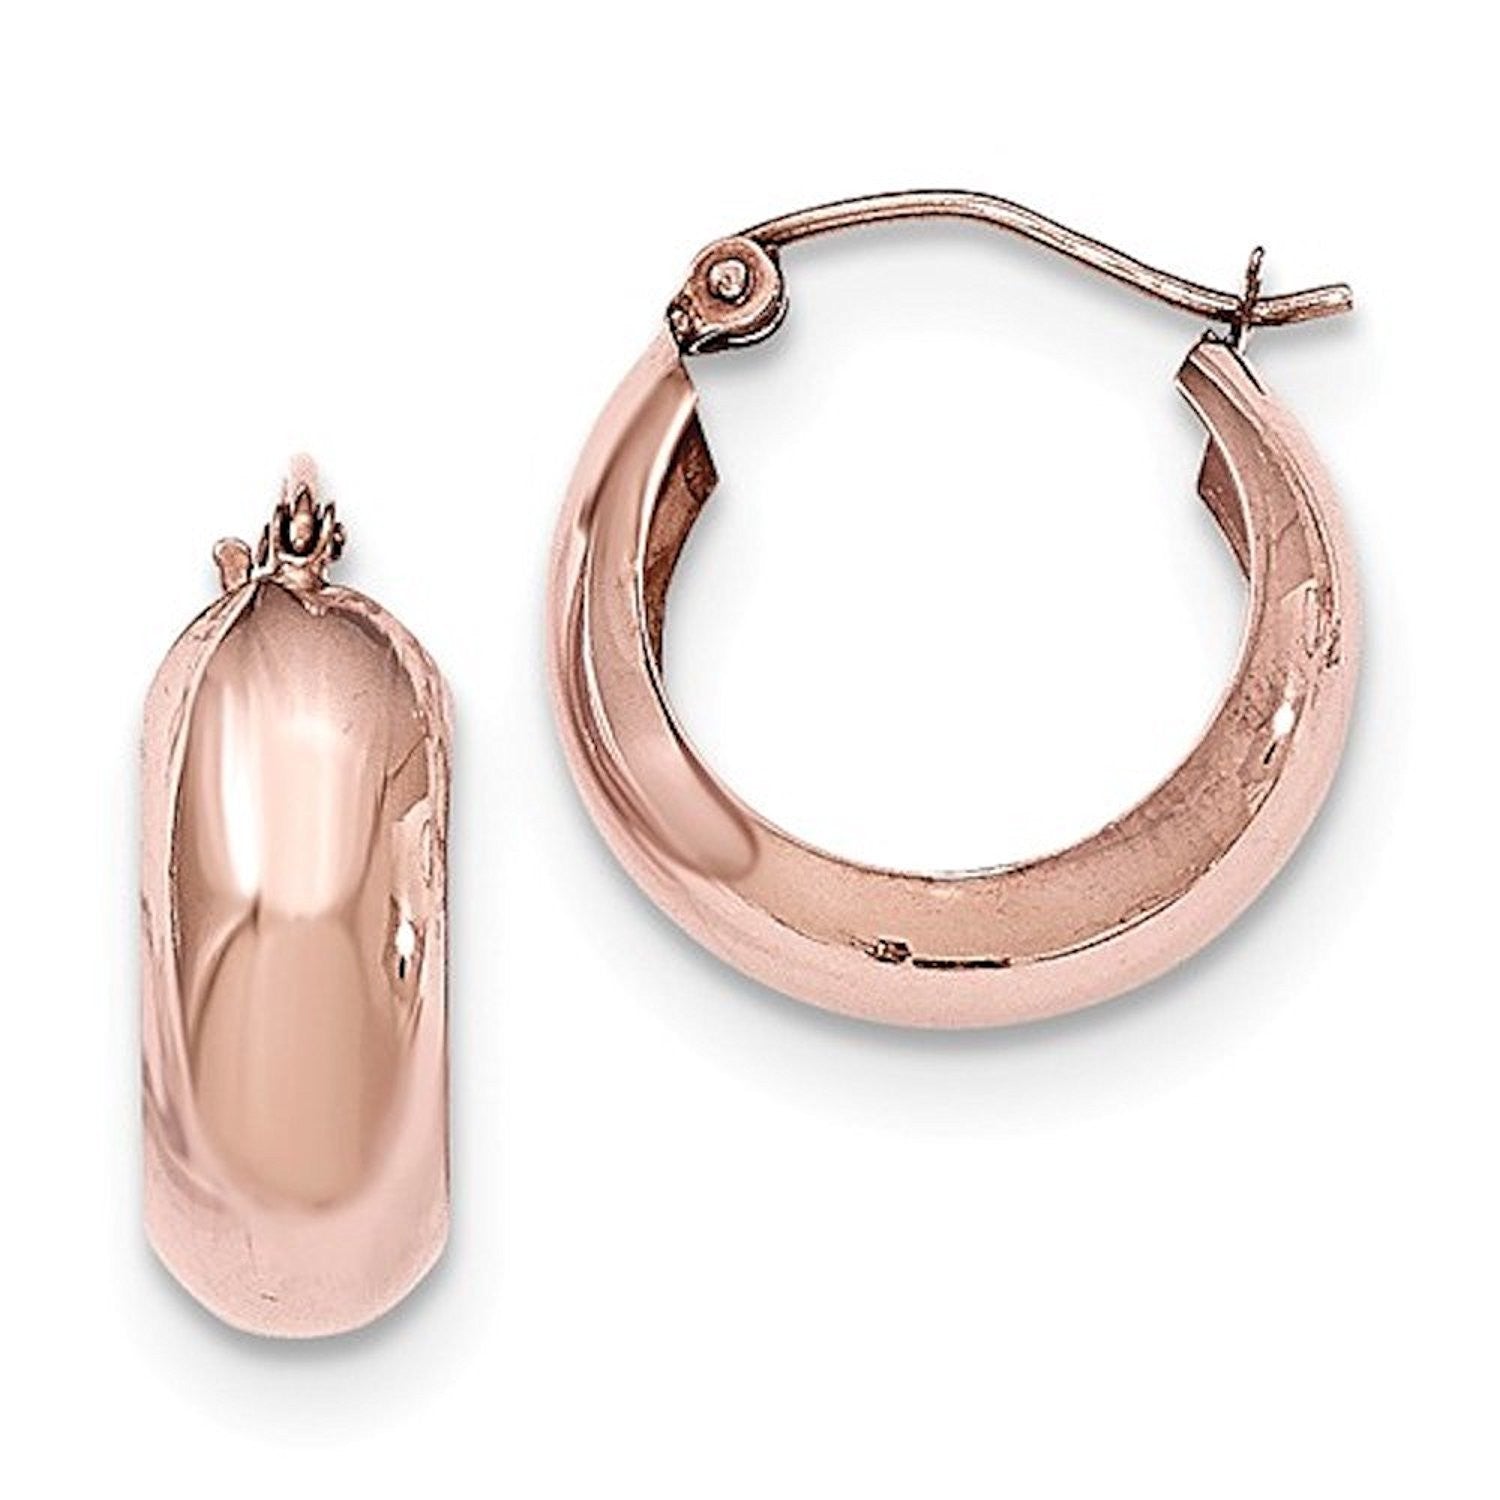 14K Rose Gold 17mm x 7mm Classic Round Hoop Earrings